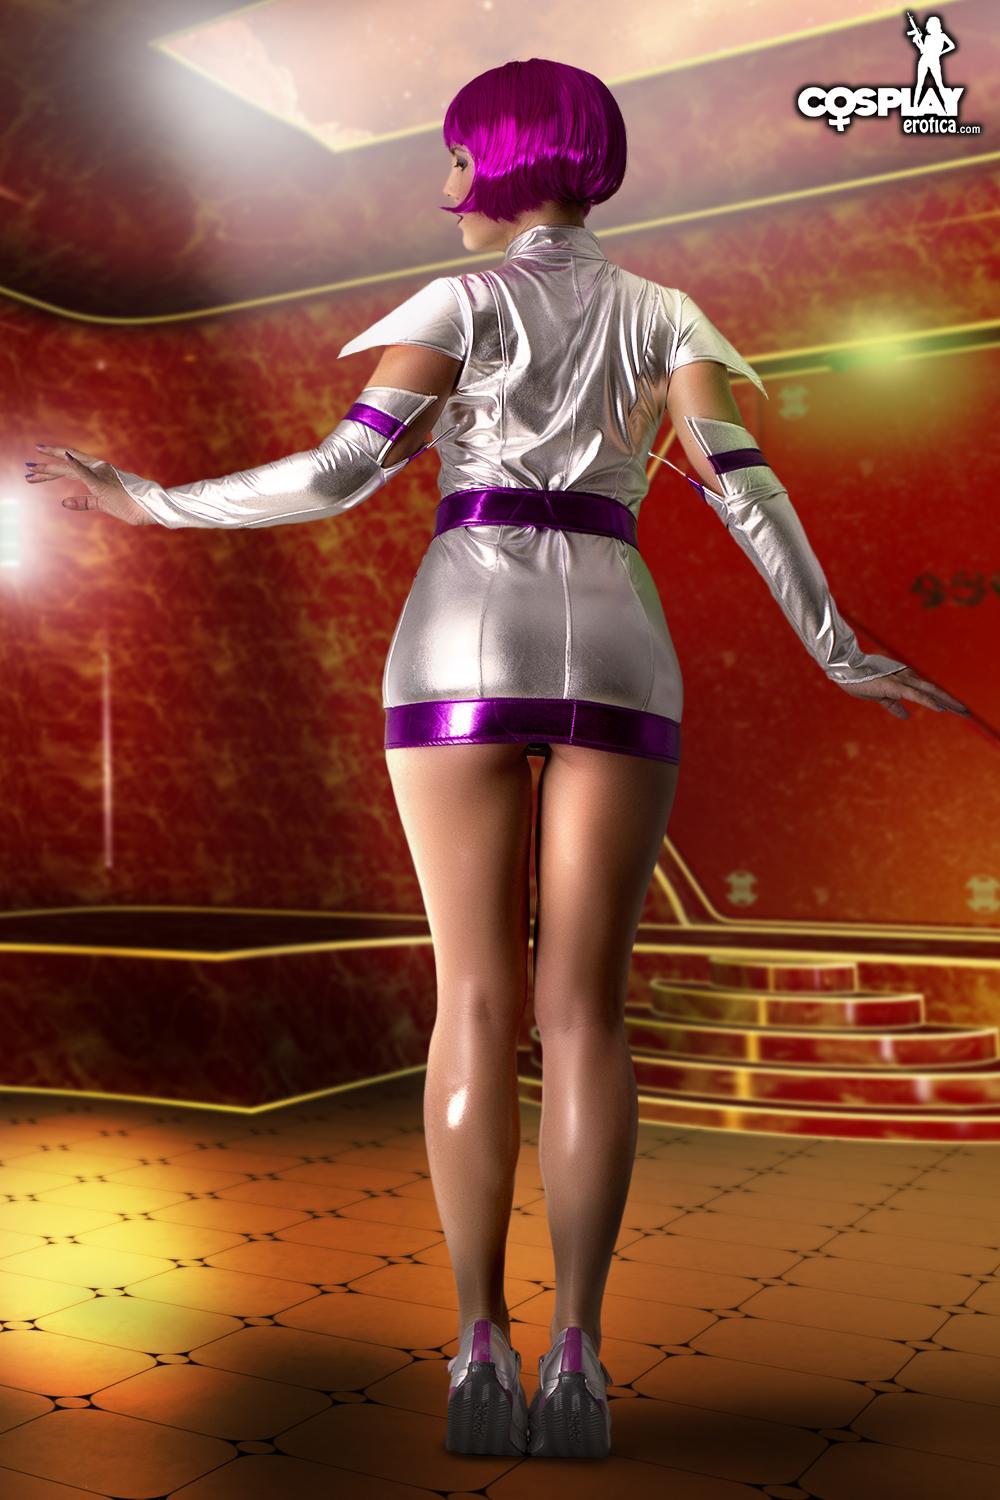 Cosplay hottie gogo expose son corps chaud dans le costume
 #54560028